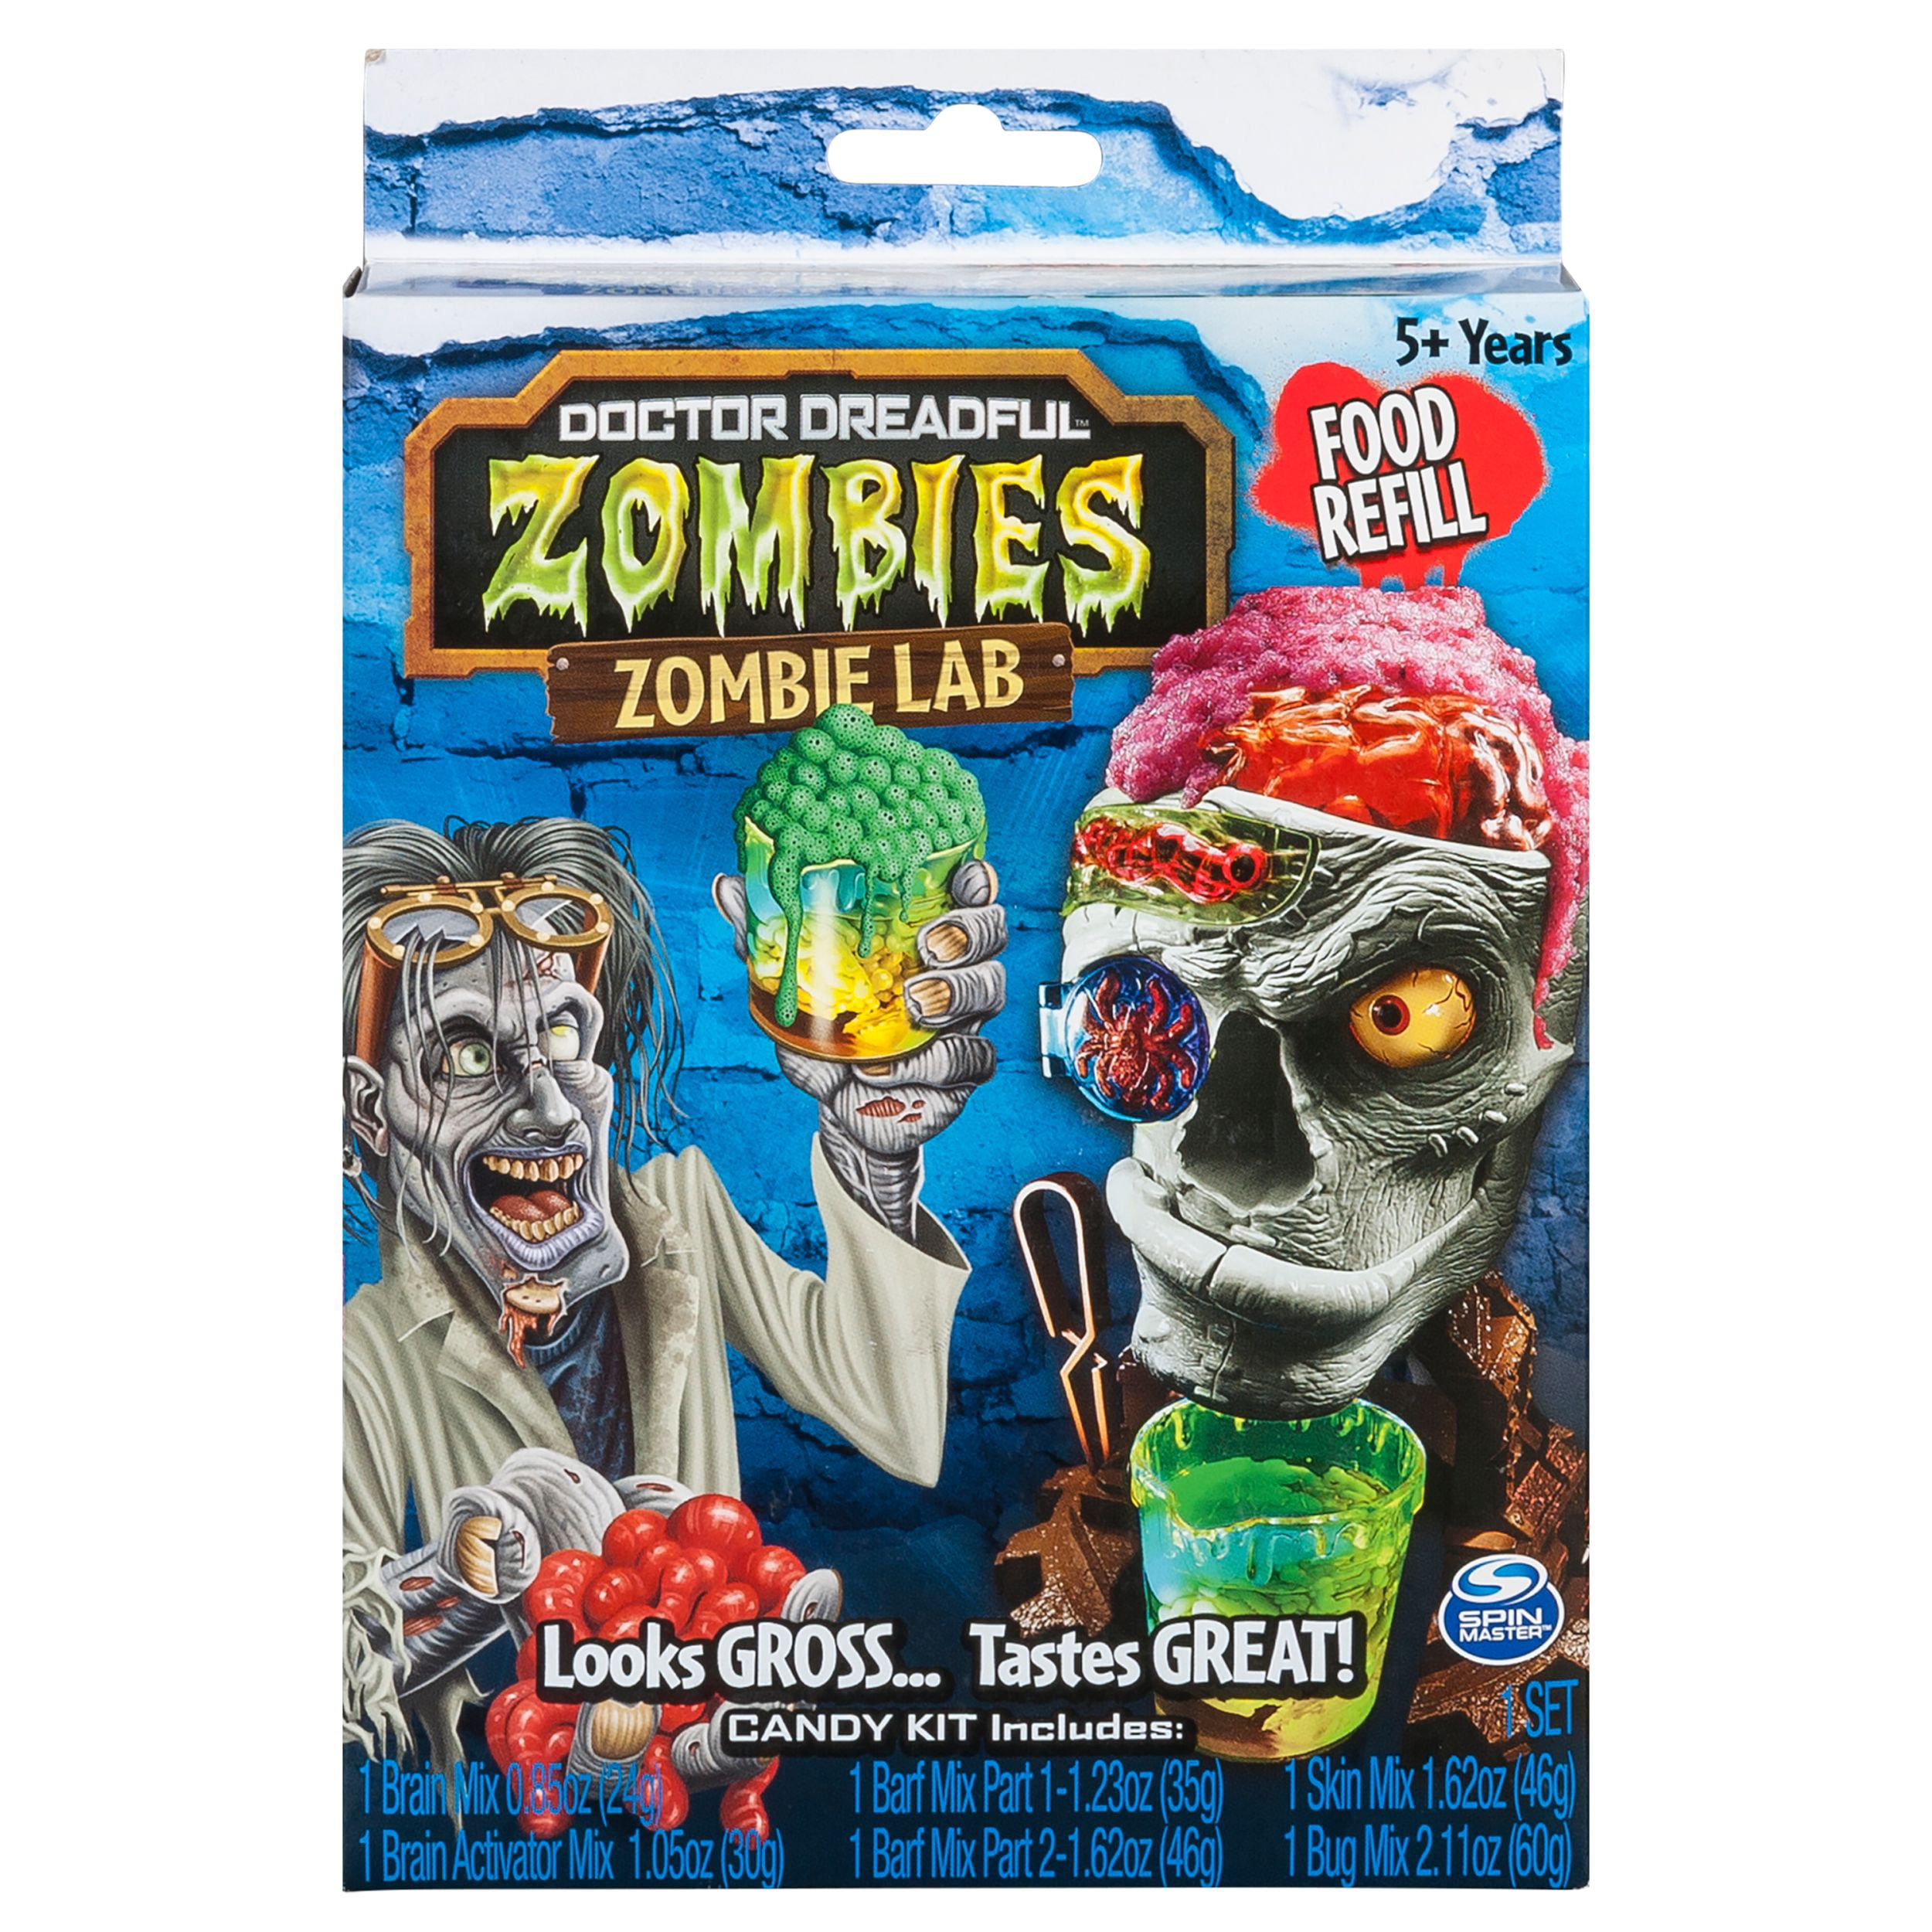 Doctor Dreadful Zombie Lab Food Refill Set 2 Candy Kit Boxes Lot Expire 2020 for sale online 